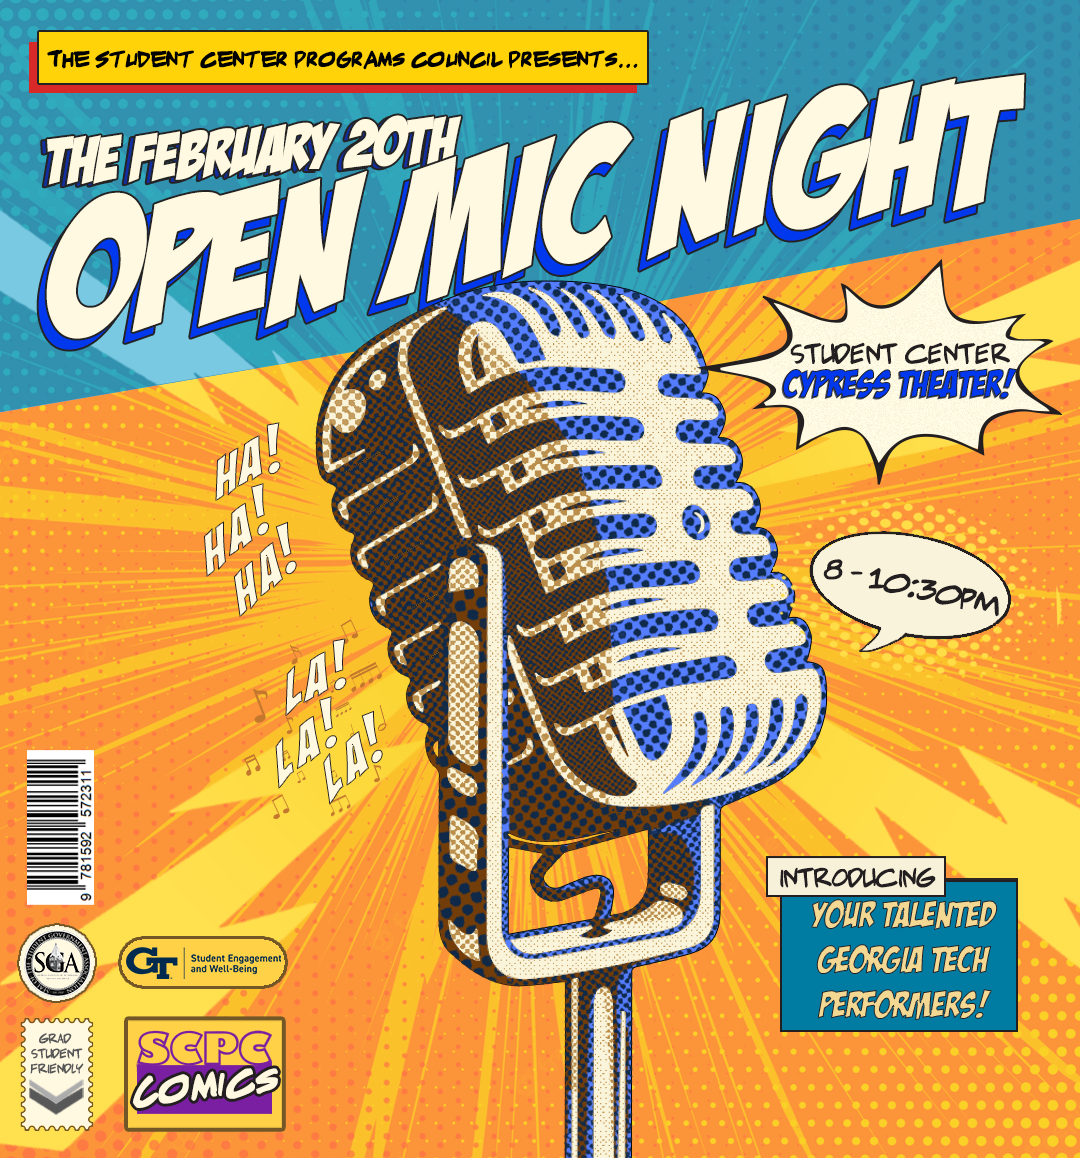 Looking for your big break into becoming a standup comedian or musician? Do you also enjoy supporting your fellow talented students on their quest to become superstars?Look no further than SCPC's Open Mic Night on Monday, February 20th 8-10:30PM! From standup comedy to juggling, magic, live music, or any other performances you want to offer, the stage is yours. We’ll also have free food for those who just want dinner and a show! Bring your friends because you definitely do not want to miss this event! Sig